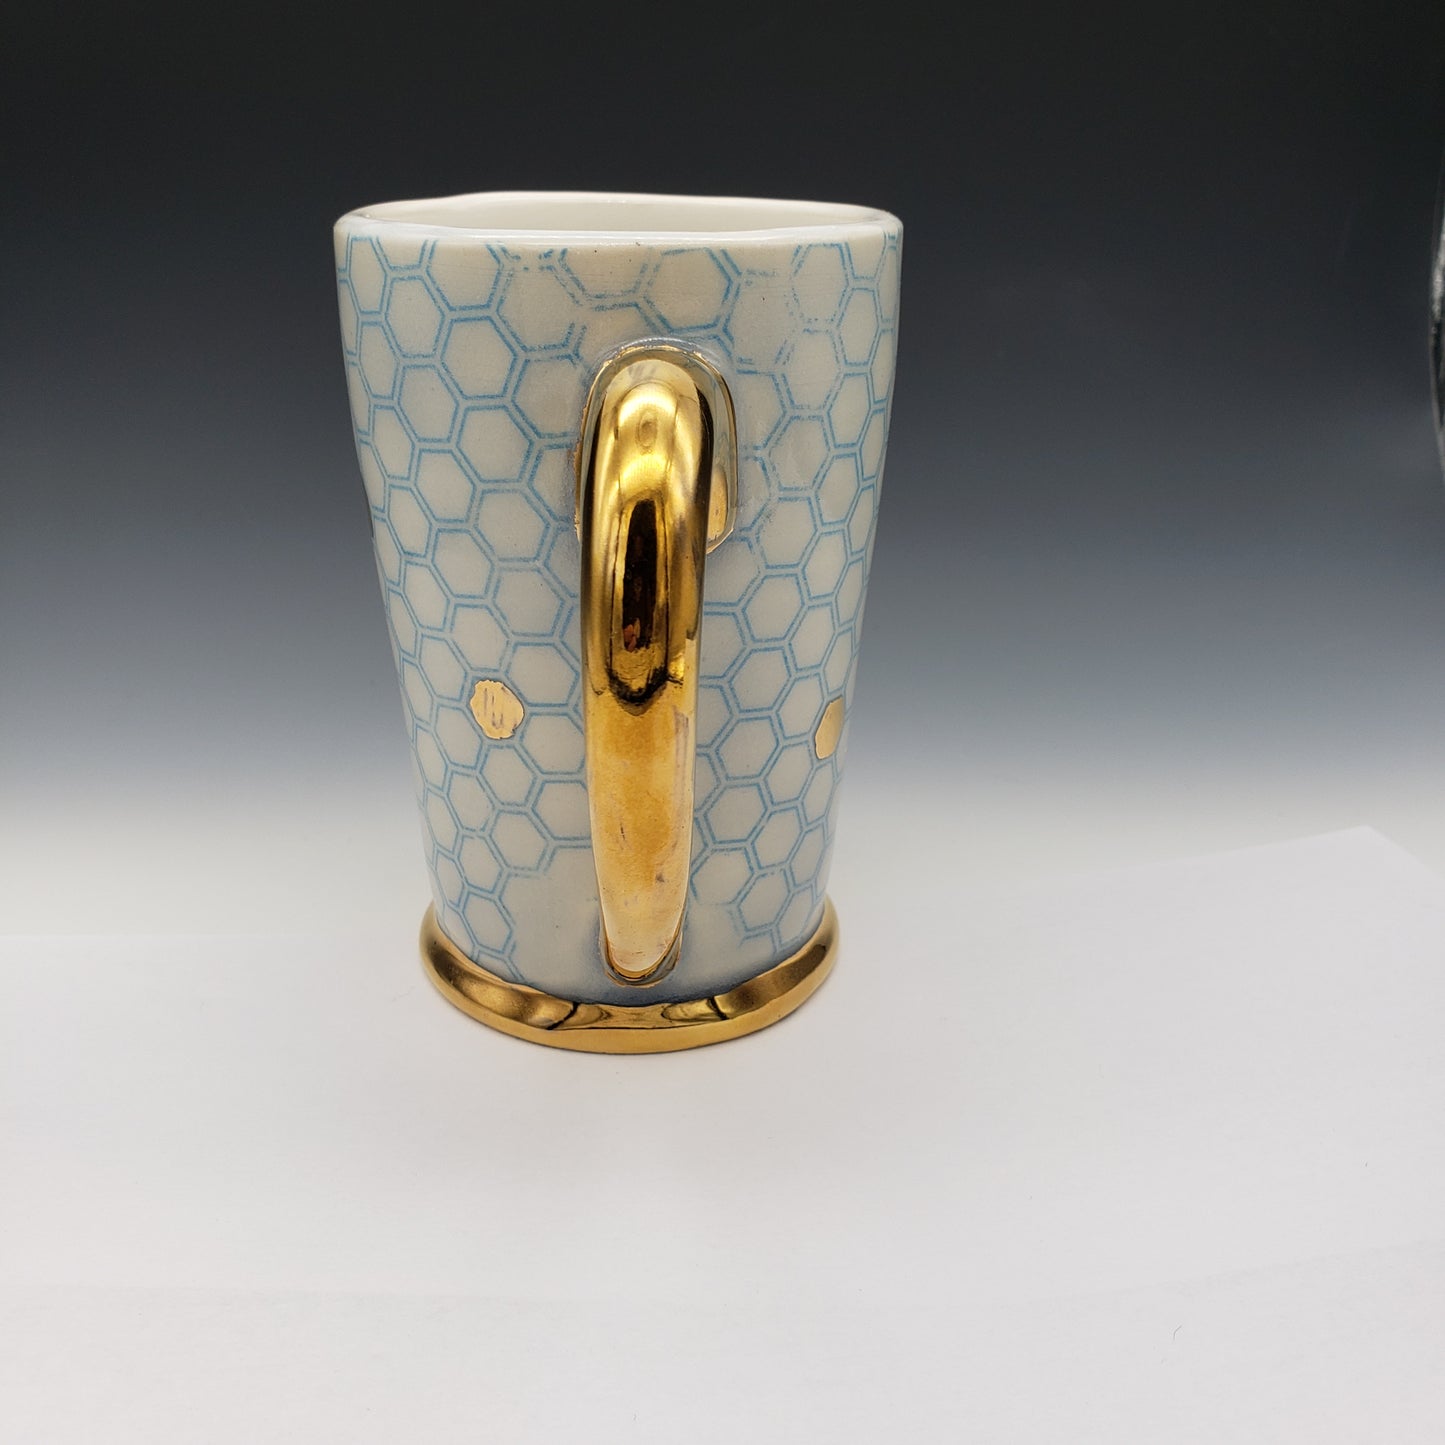 Blue and white honeycomb mug with 14k yellow gold on the handle and base.